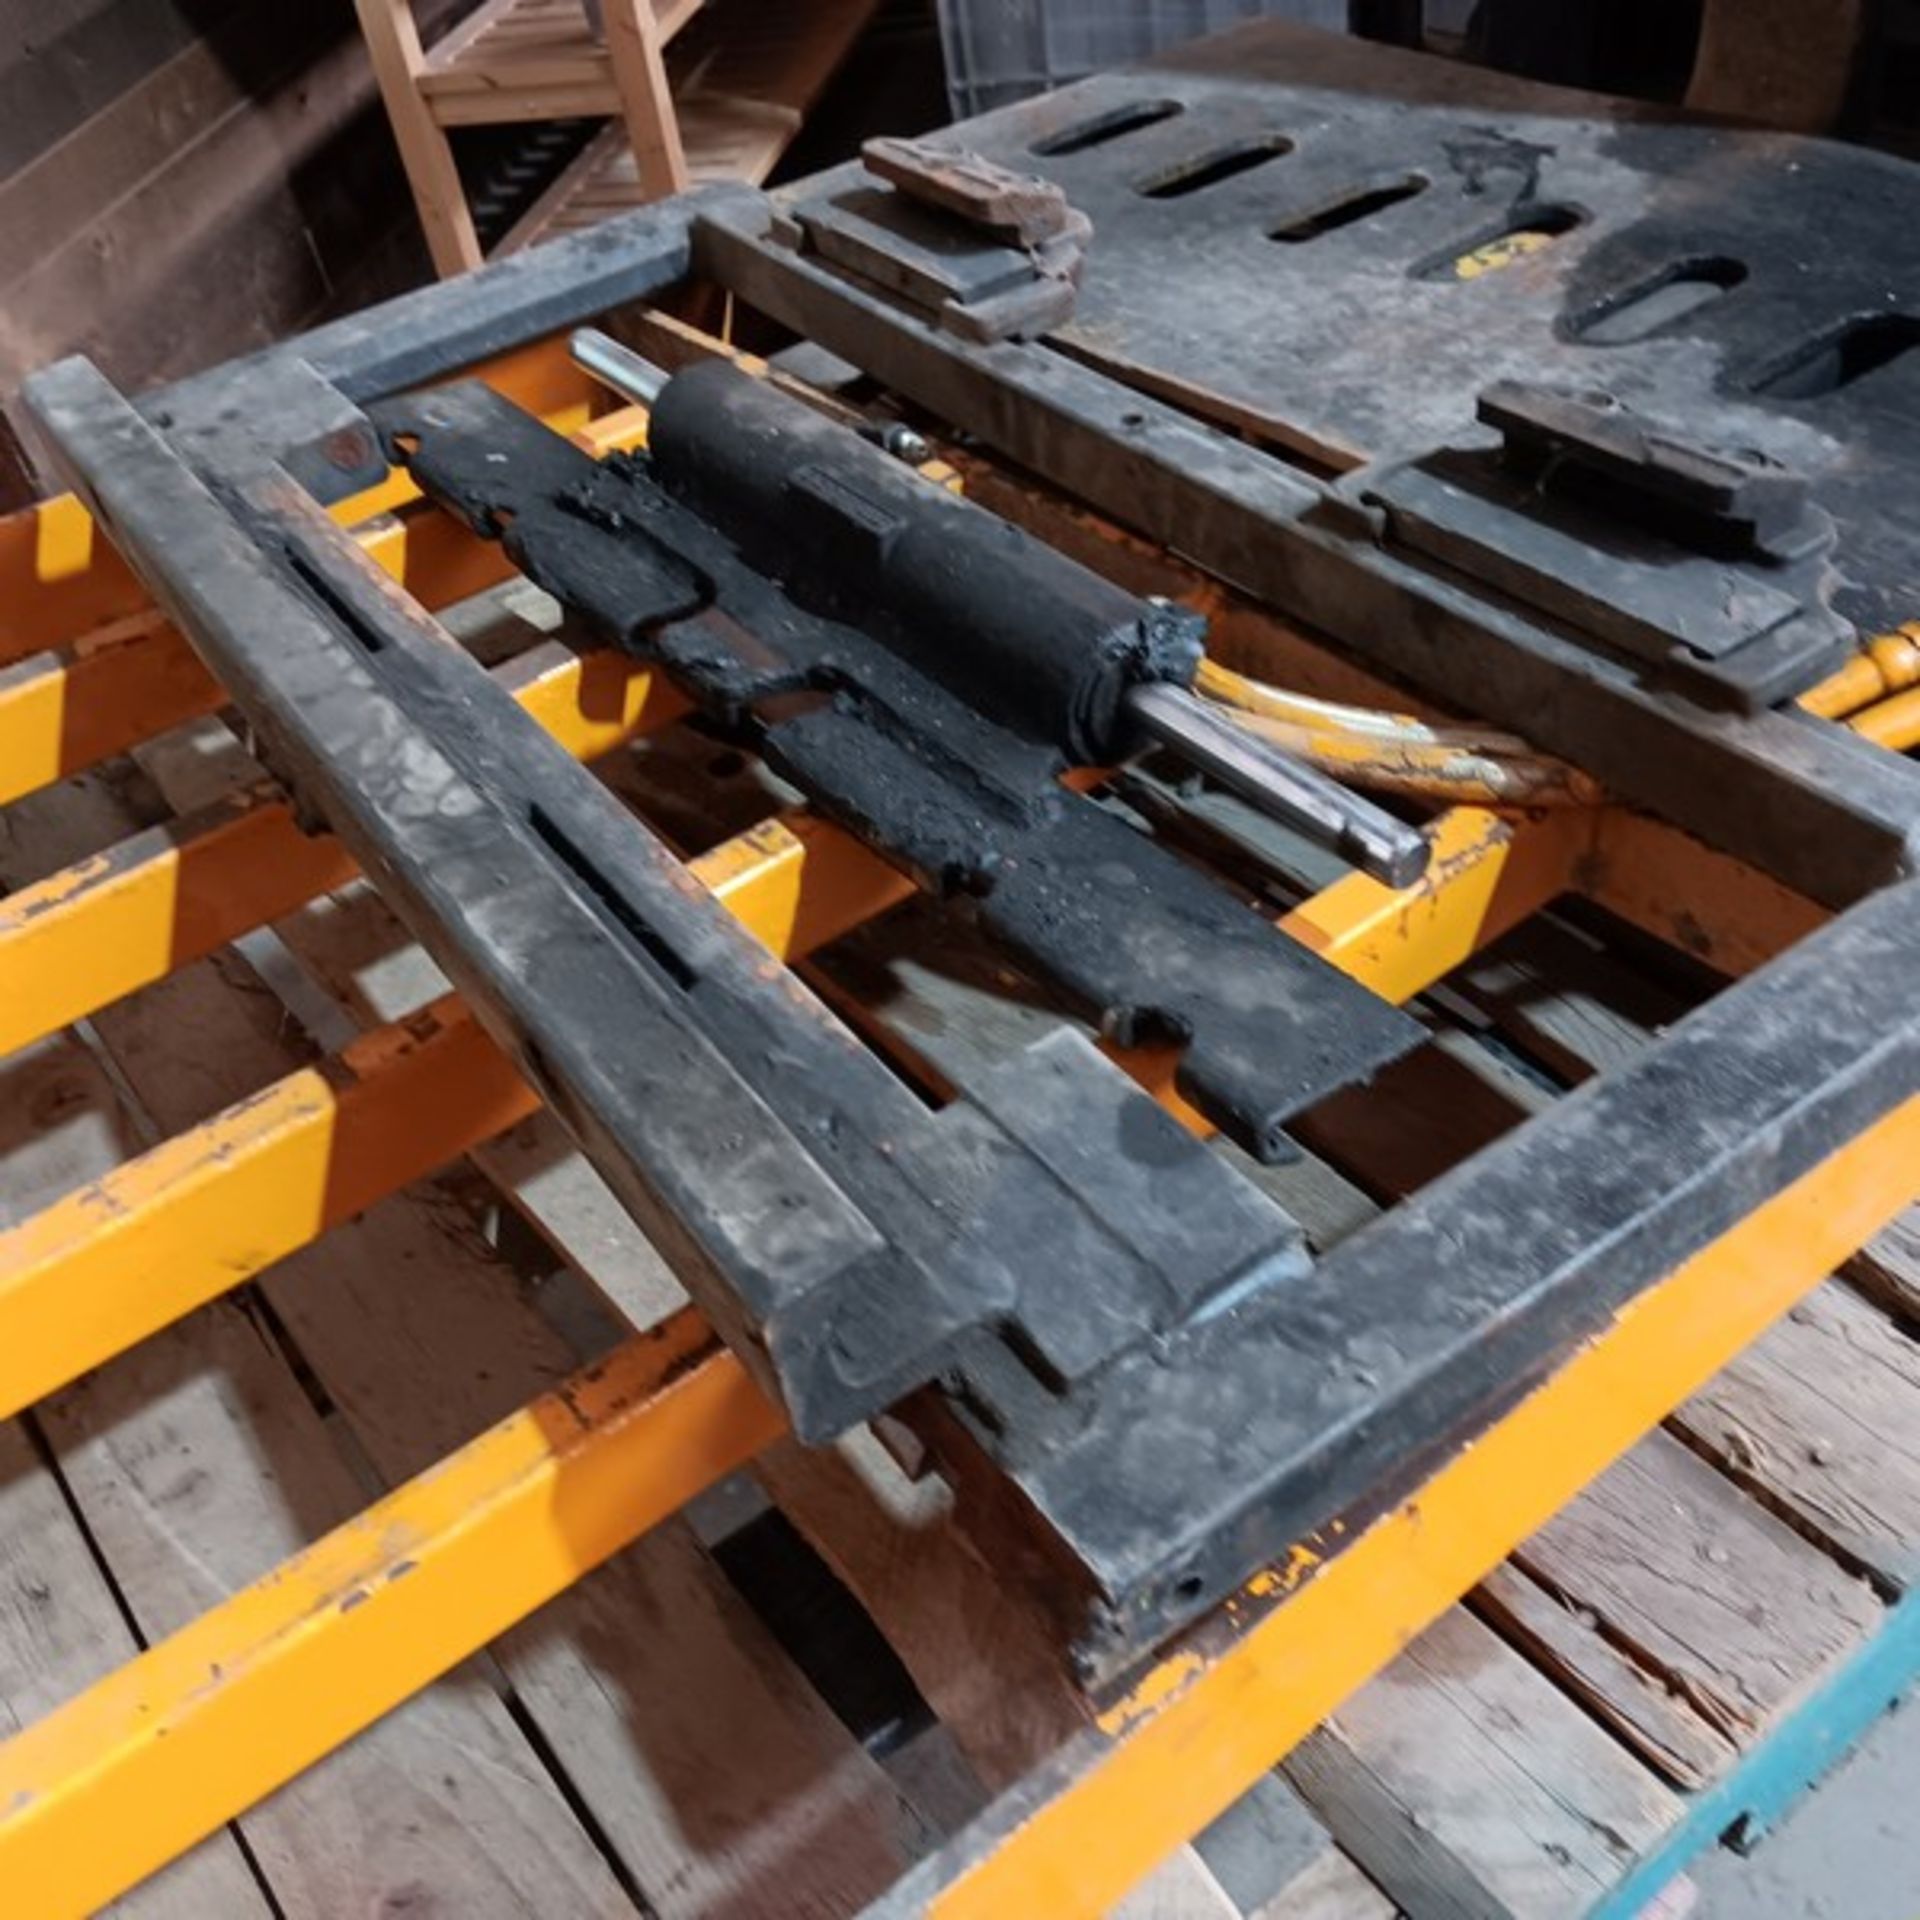 Forklift Fork Spreader Attachment (Loading Fee $150) (Located Fort Worth, TX) - Image 2 of 3